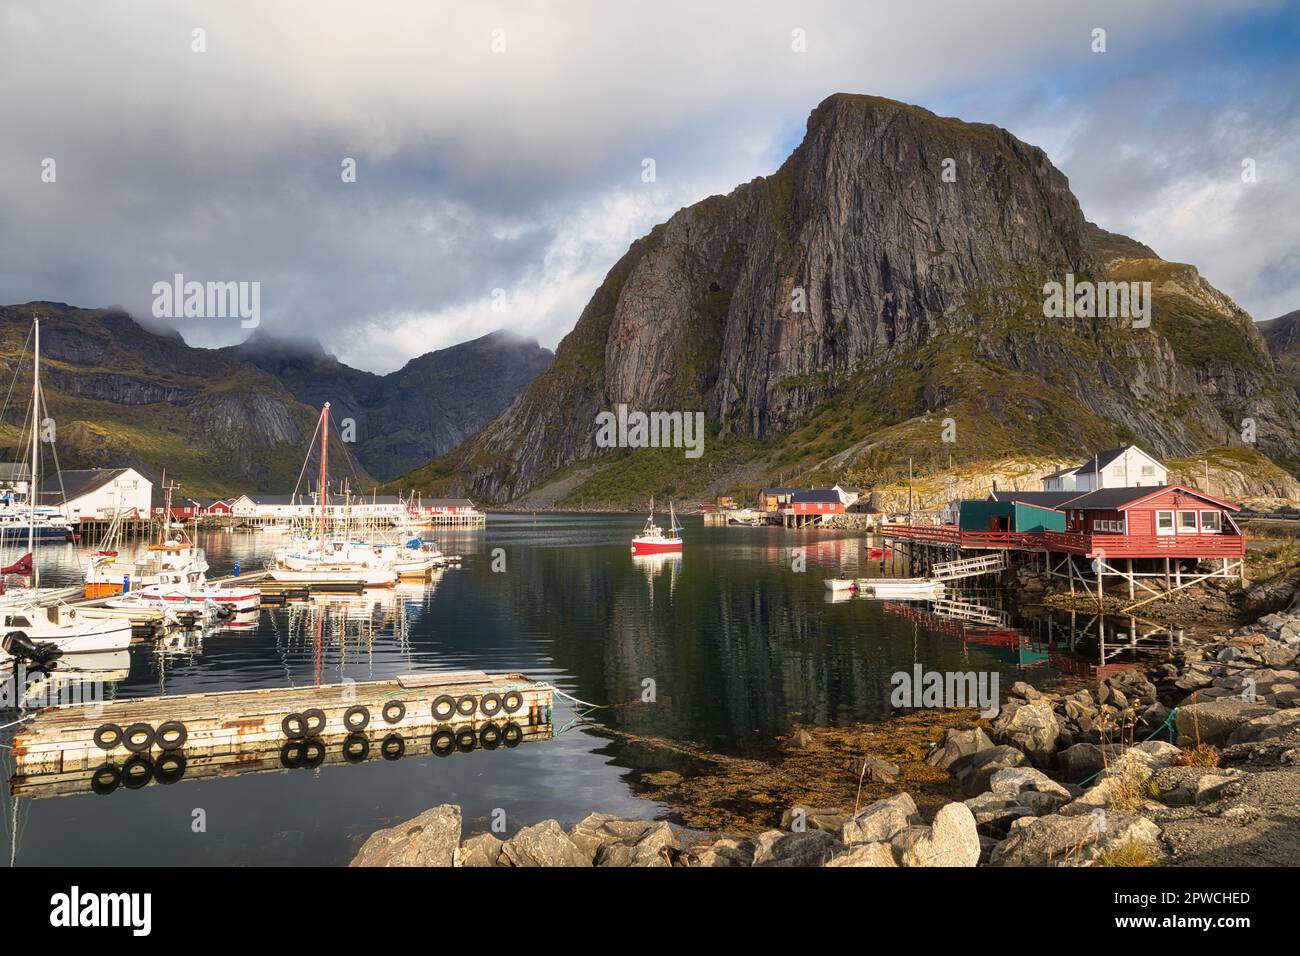 https://c8.alamy.com/comp/2PWCHED/red-rorbuer-on-a-stony-shore-fishing-boats-high-rugged-mountains-hamnoey-moskenesoya-moskenes-lofoten-norway-2PWCHED.jpg